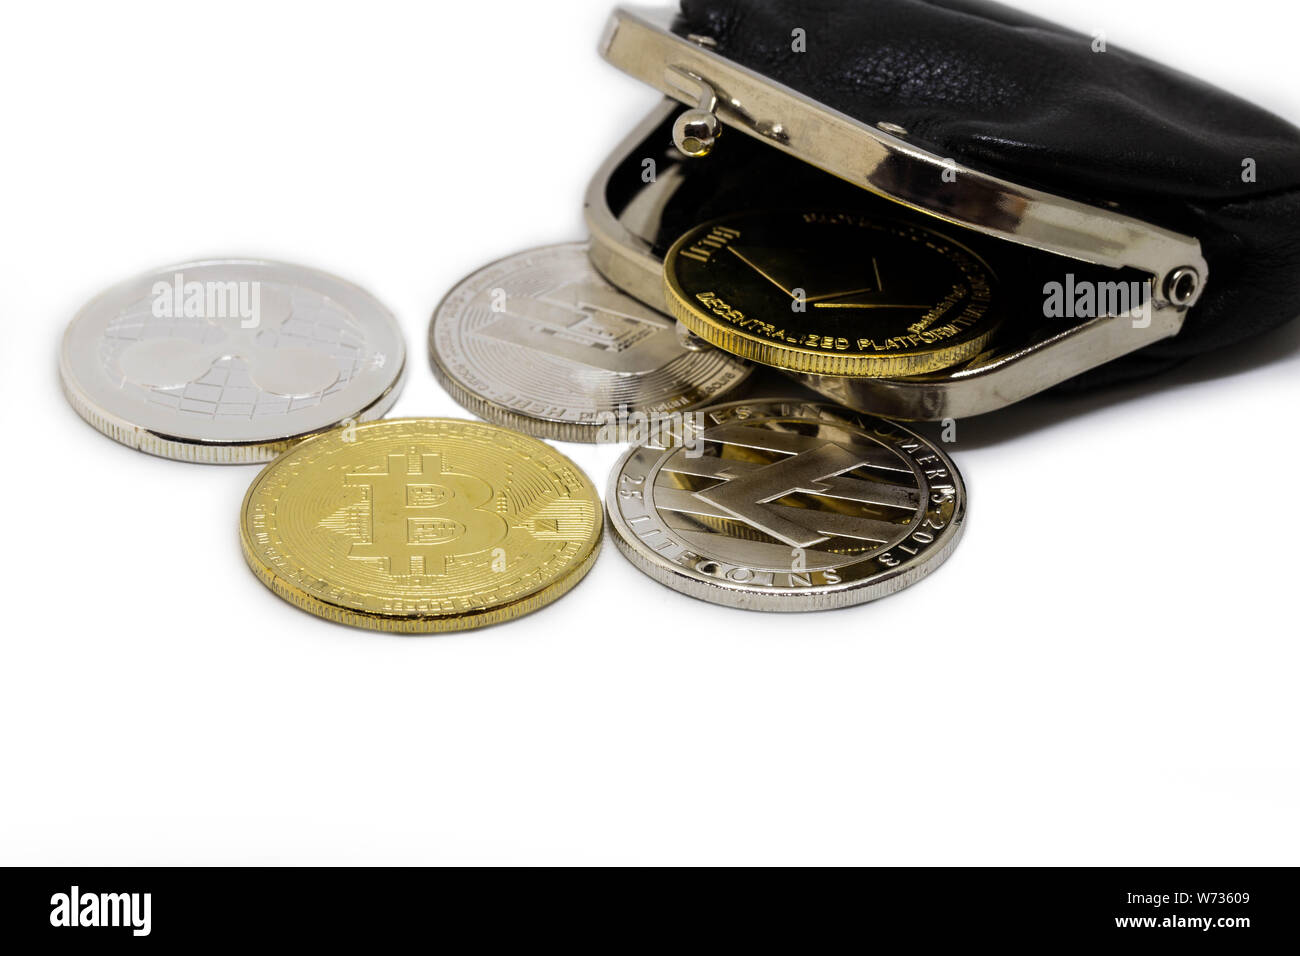 stack of cryptocurrenciesm bitcoin and altcoin together, isolated on white with black wallet Stock Photo